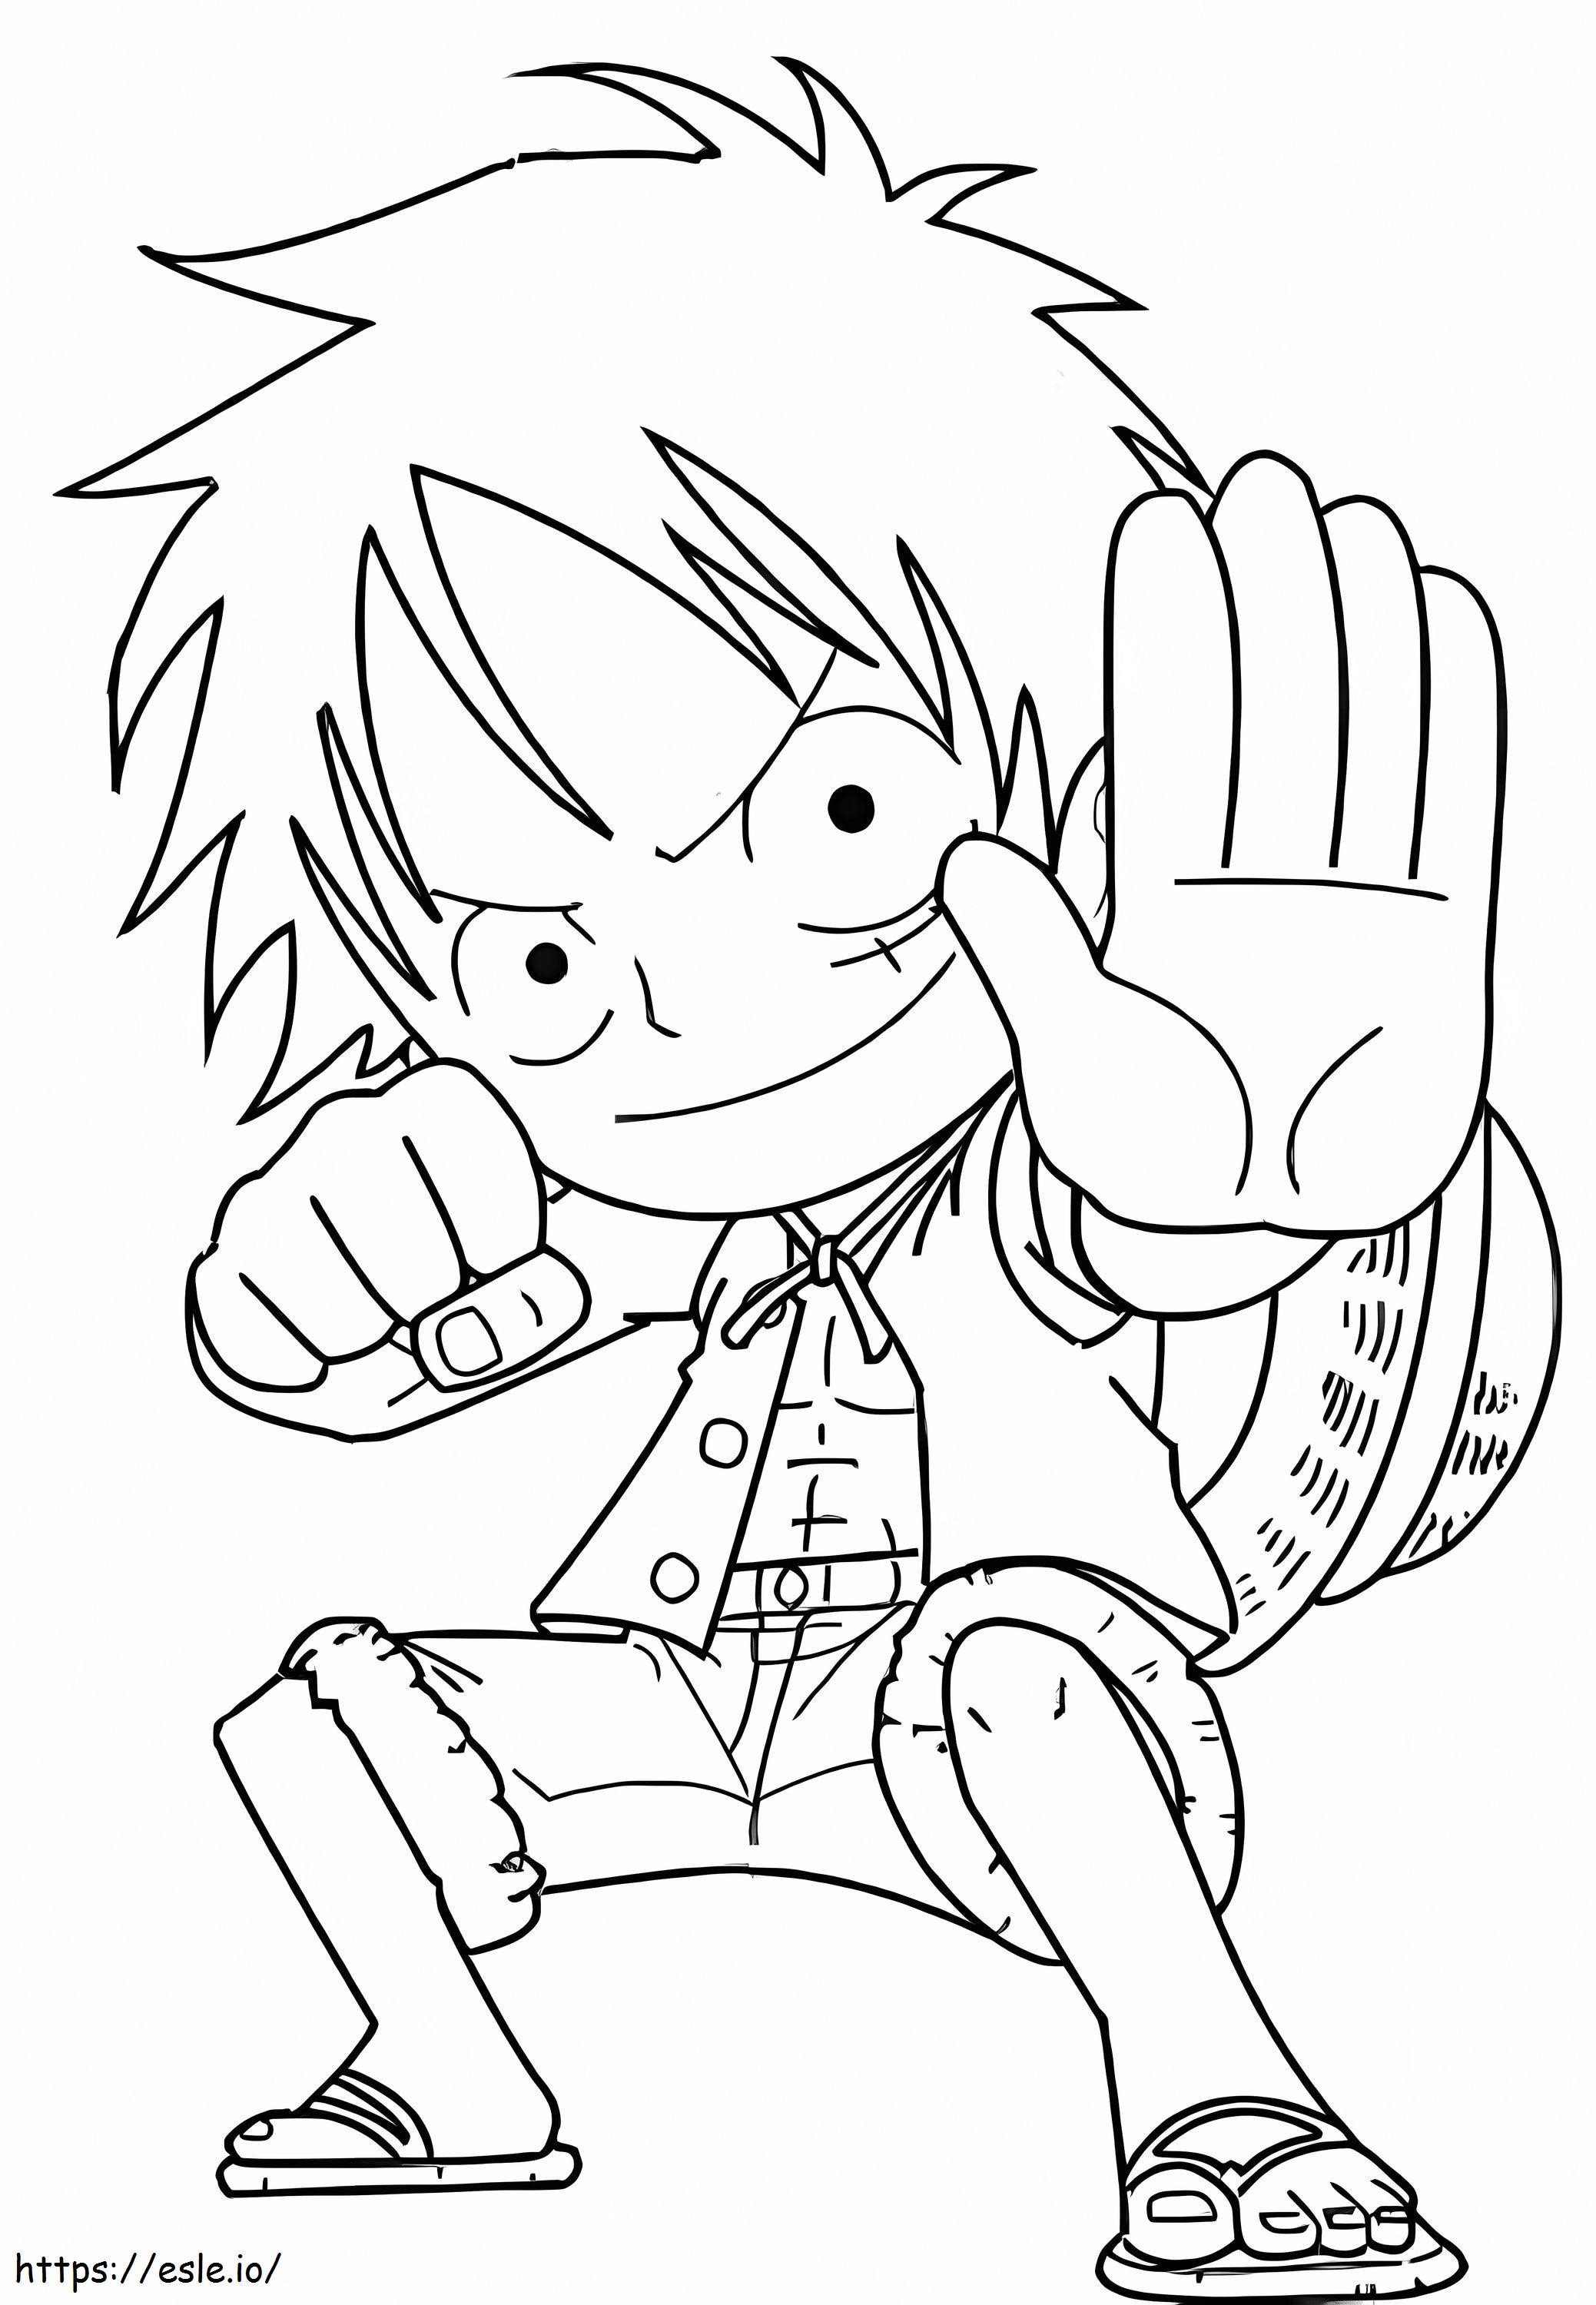 Chibi Luffy coloring page